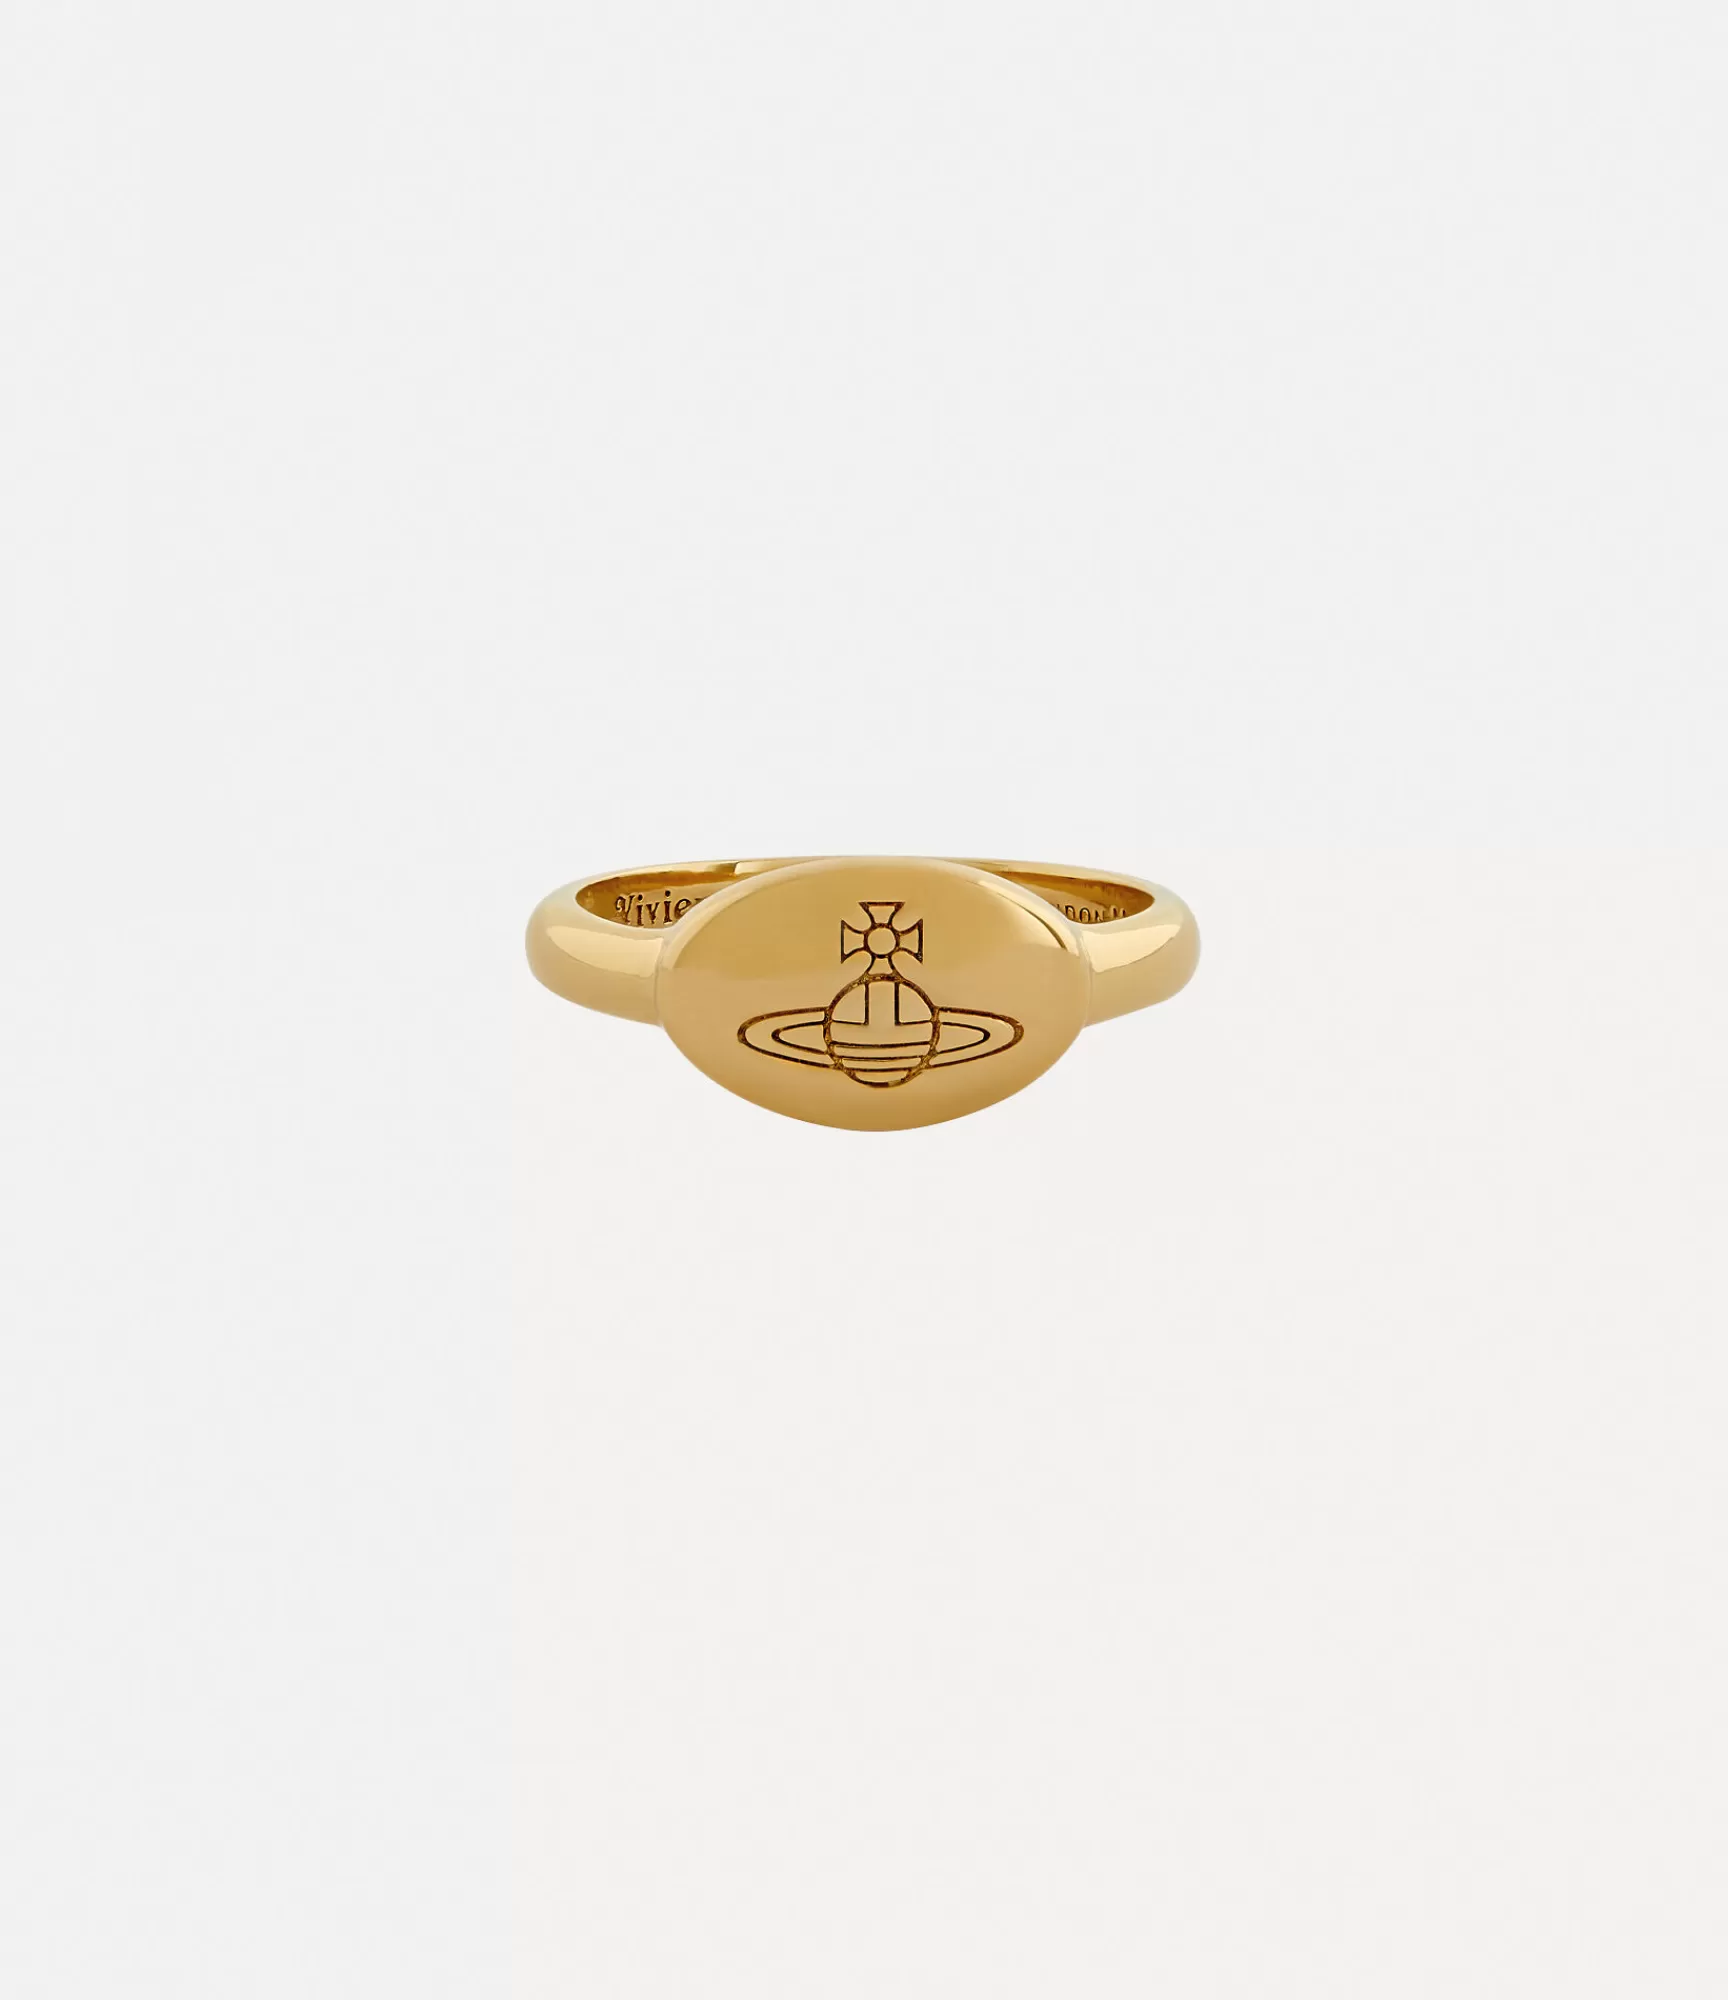 Vivienne Westwood Rings*Tilly ring Gold